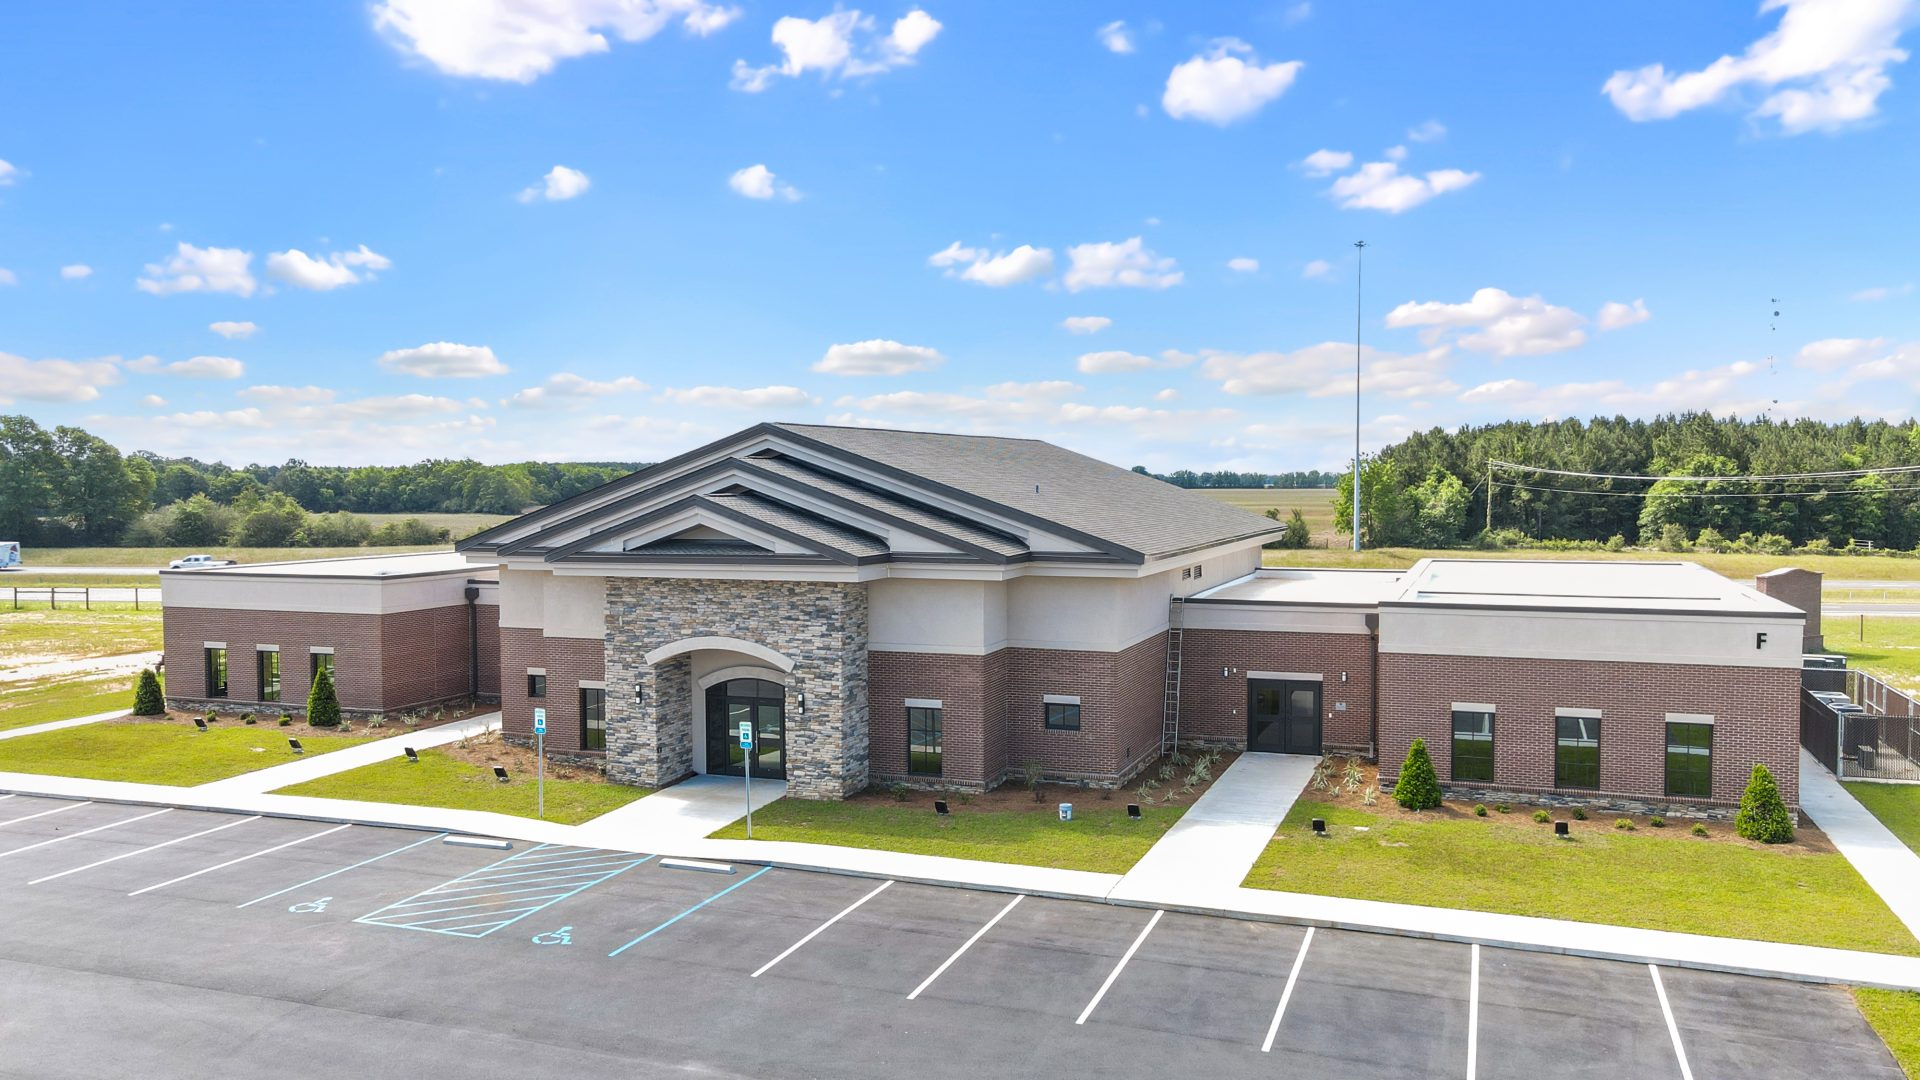 Highland Finalizes Atmore Conference & Education Center Construction at Coastal Alabama Community College